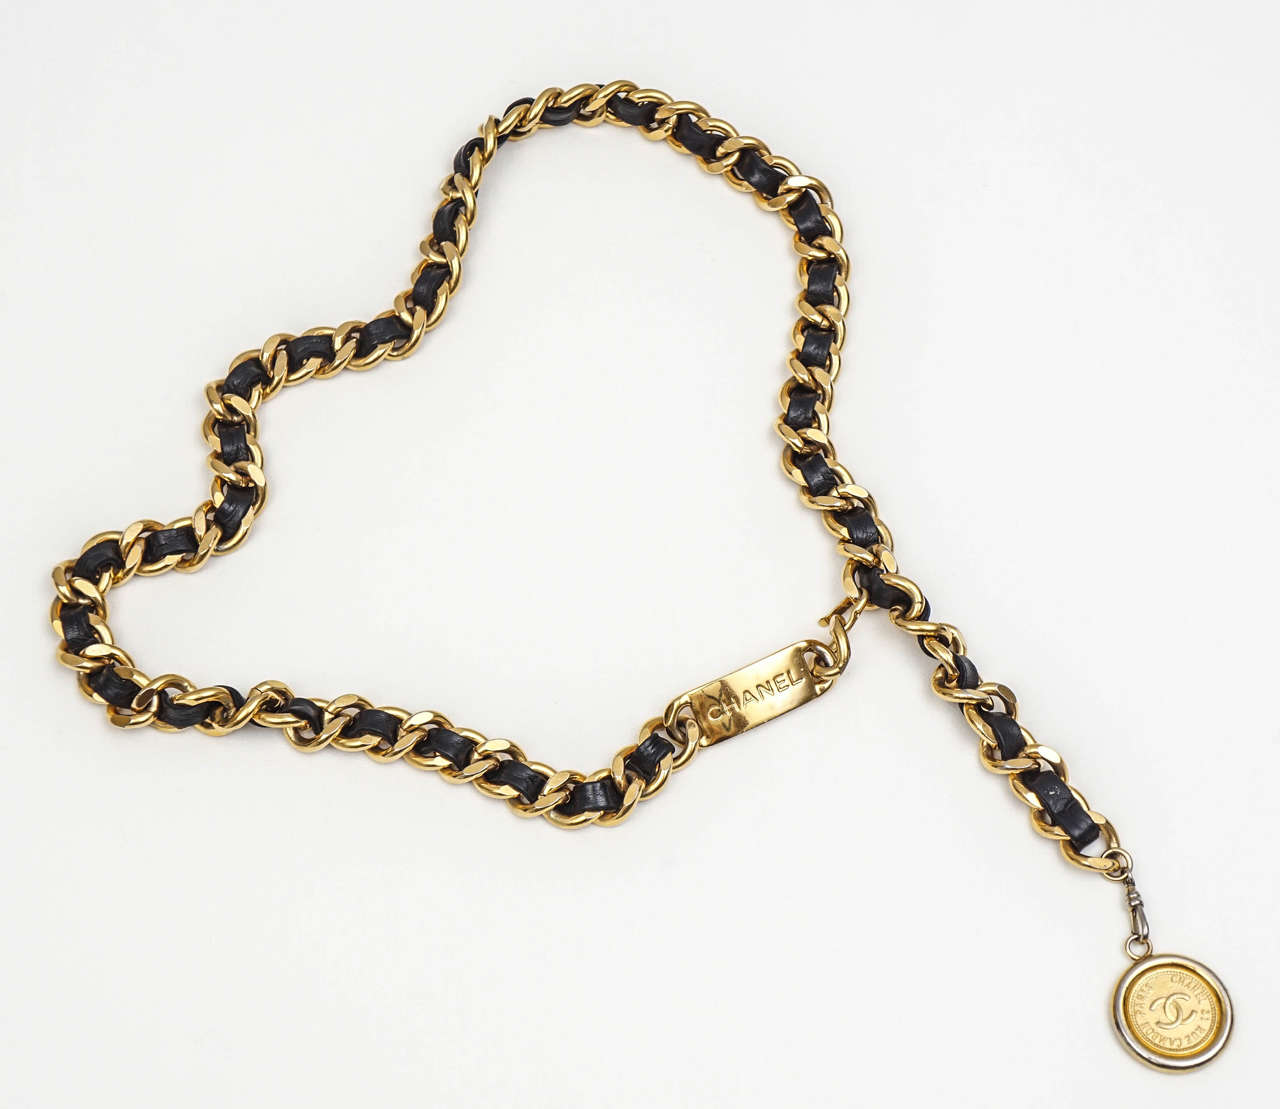 Other Vintage Chanel Leather and Metal Chain Belt